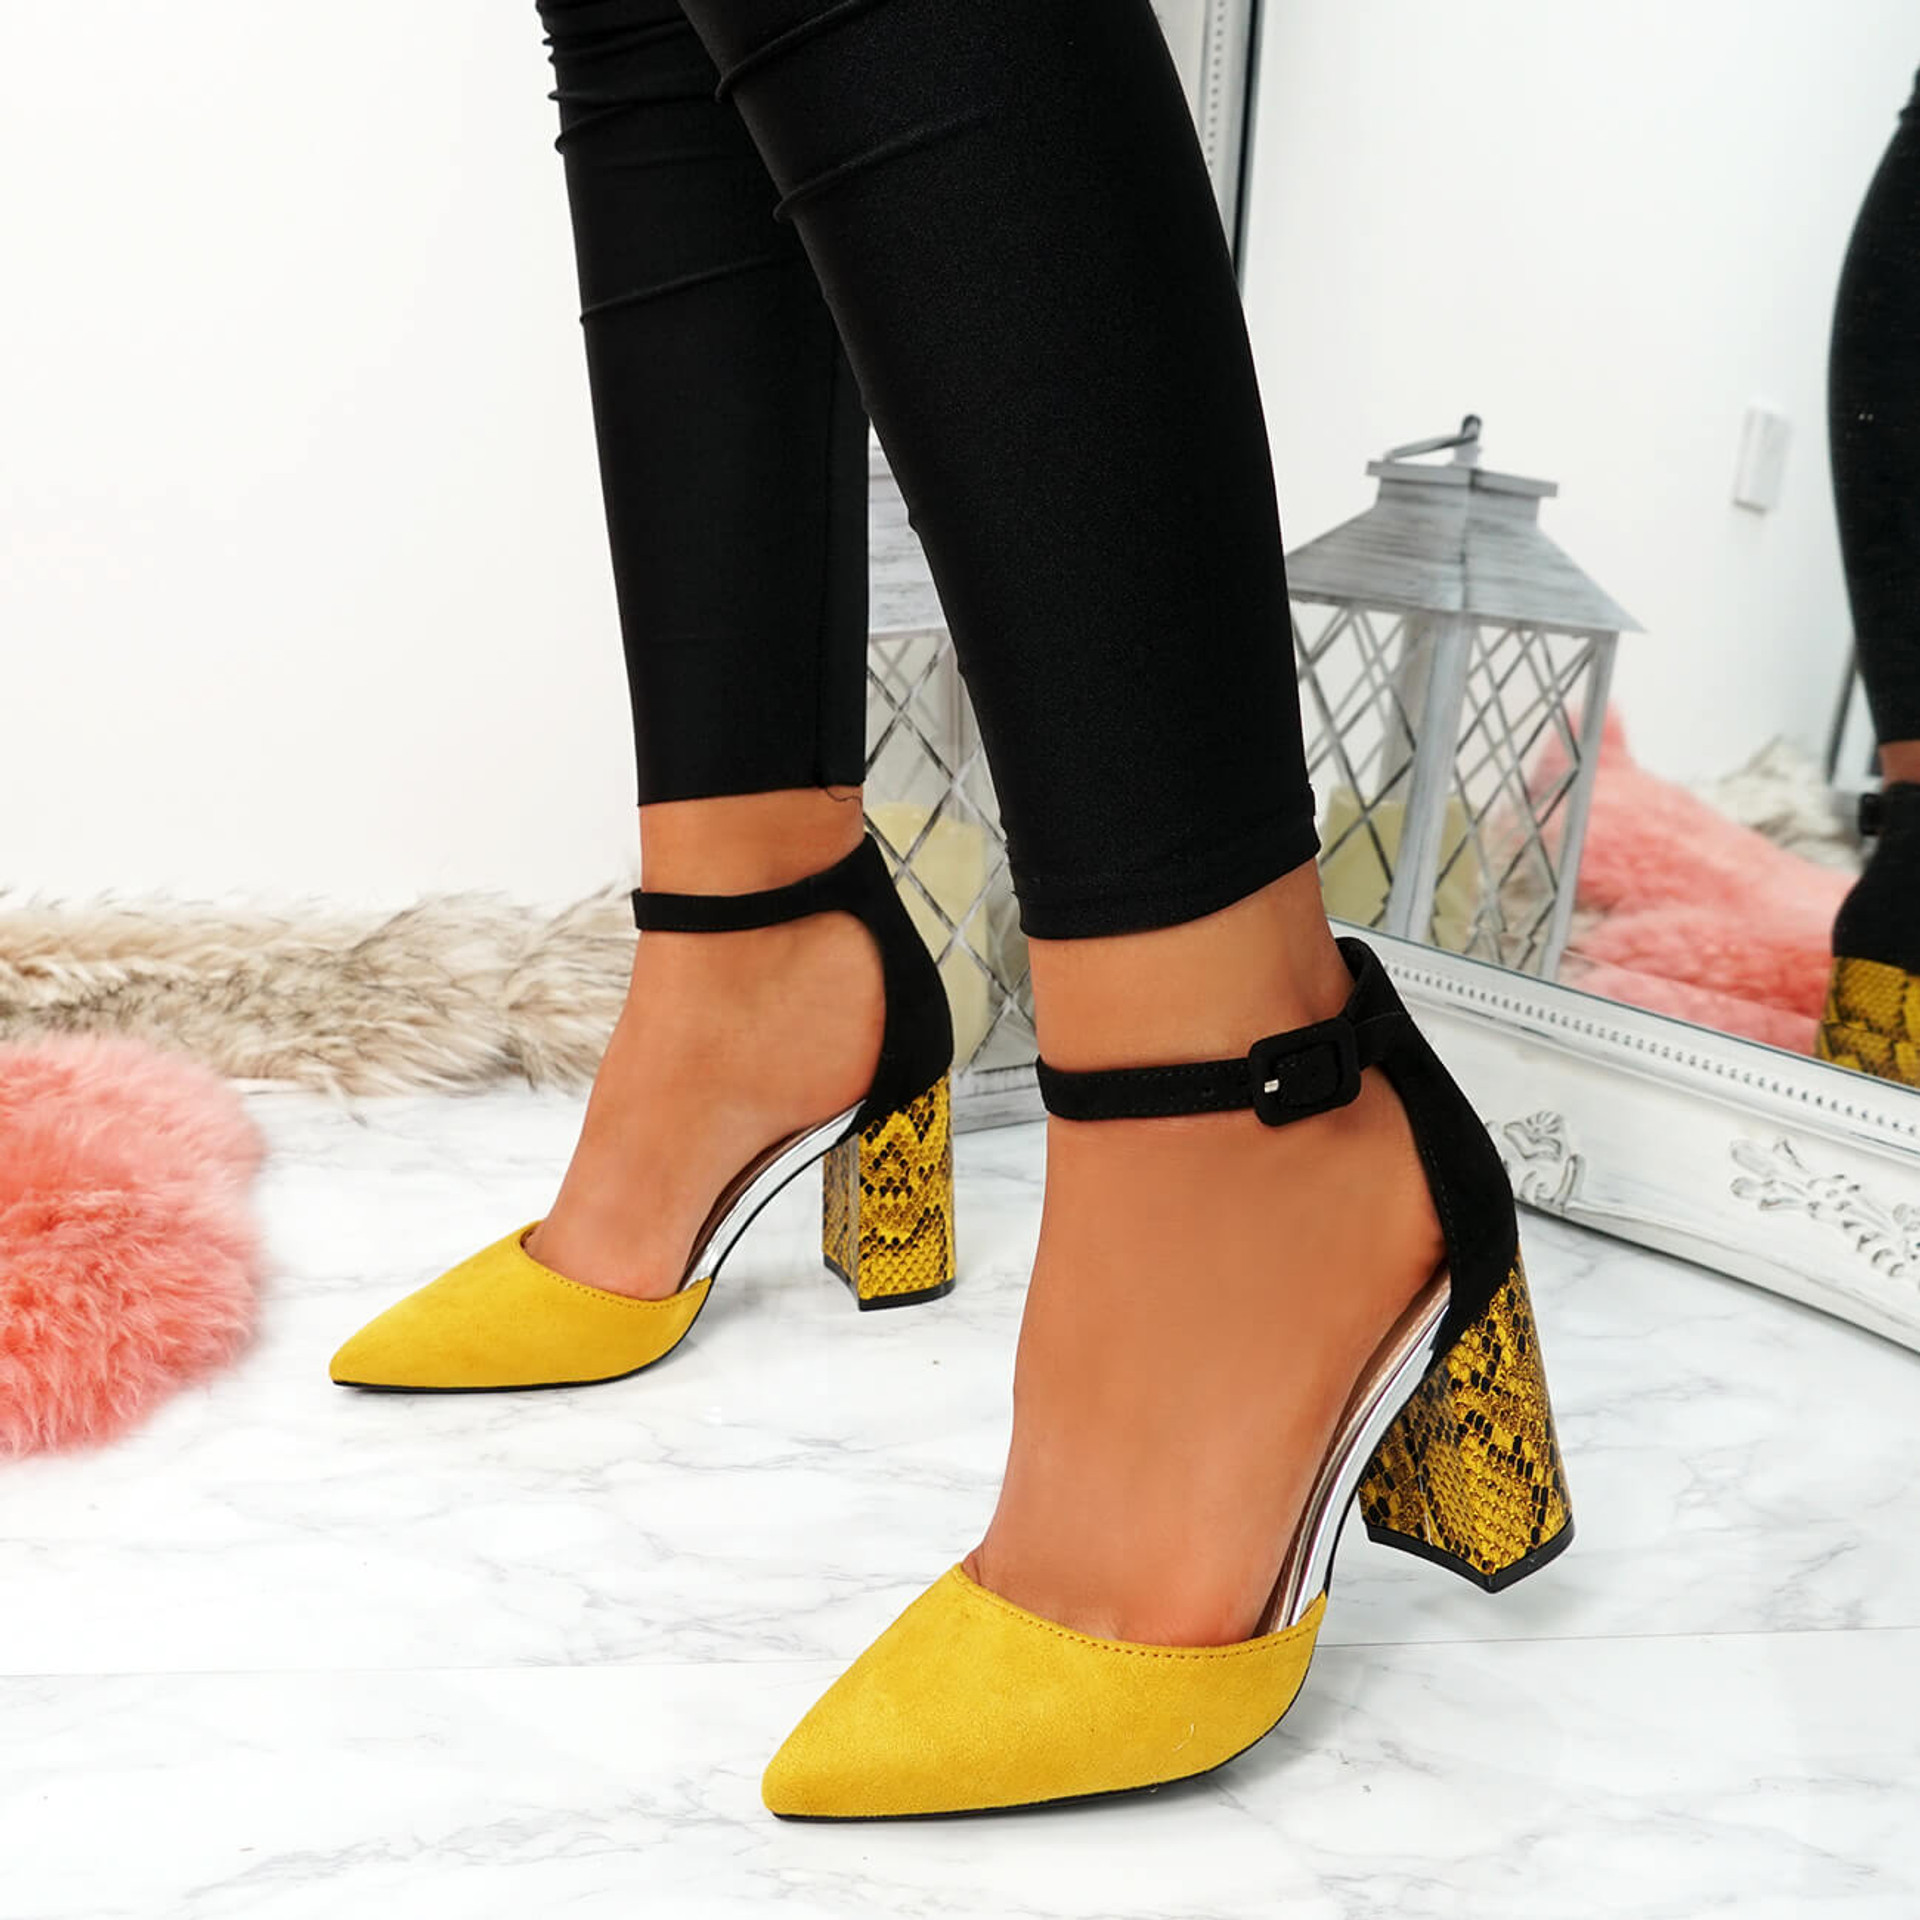 Jimmy Choo Romy Suede Point Toe Pumps Bright Yellow, $595 |  NET-A-PORTER.COM | Lookastic